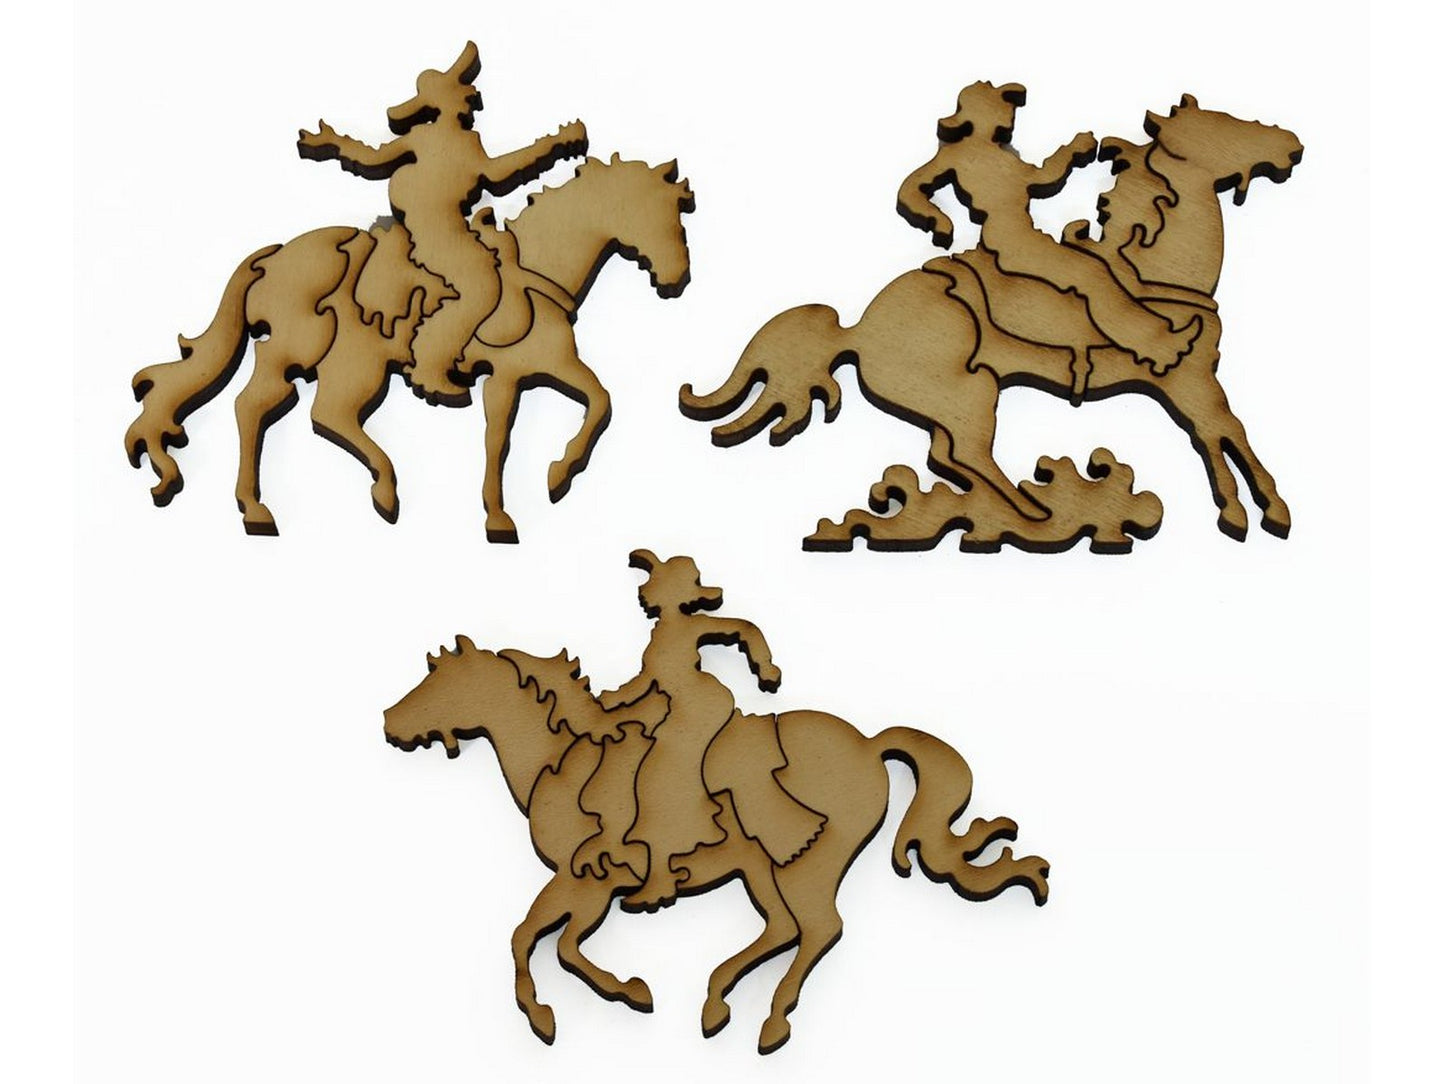 A closeup of pieces showing three multi-piece cowboys on horseback.